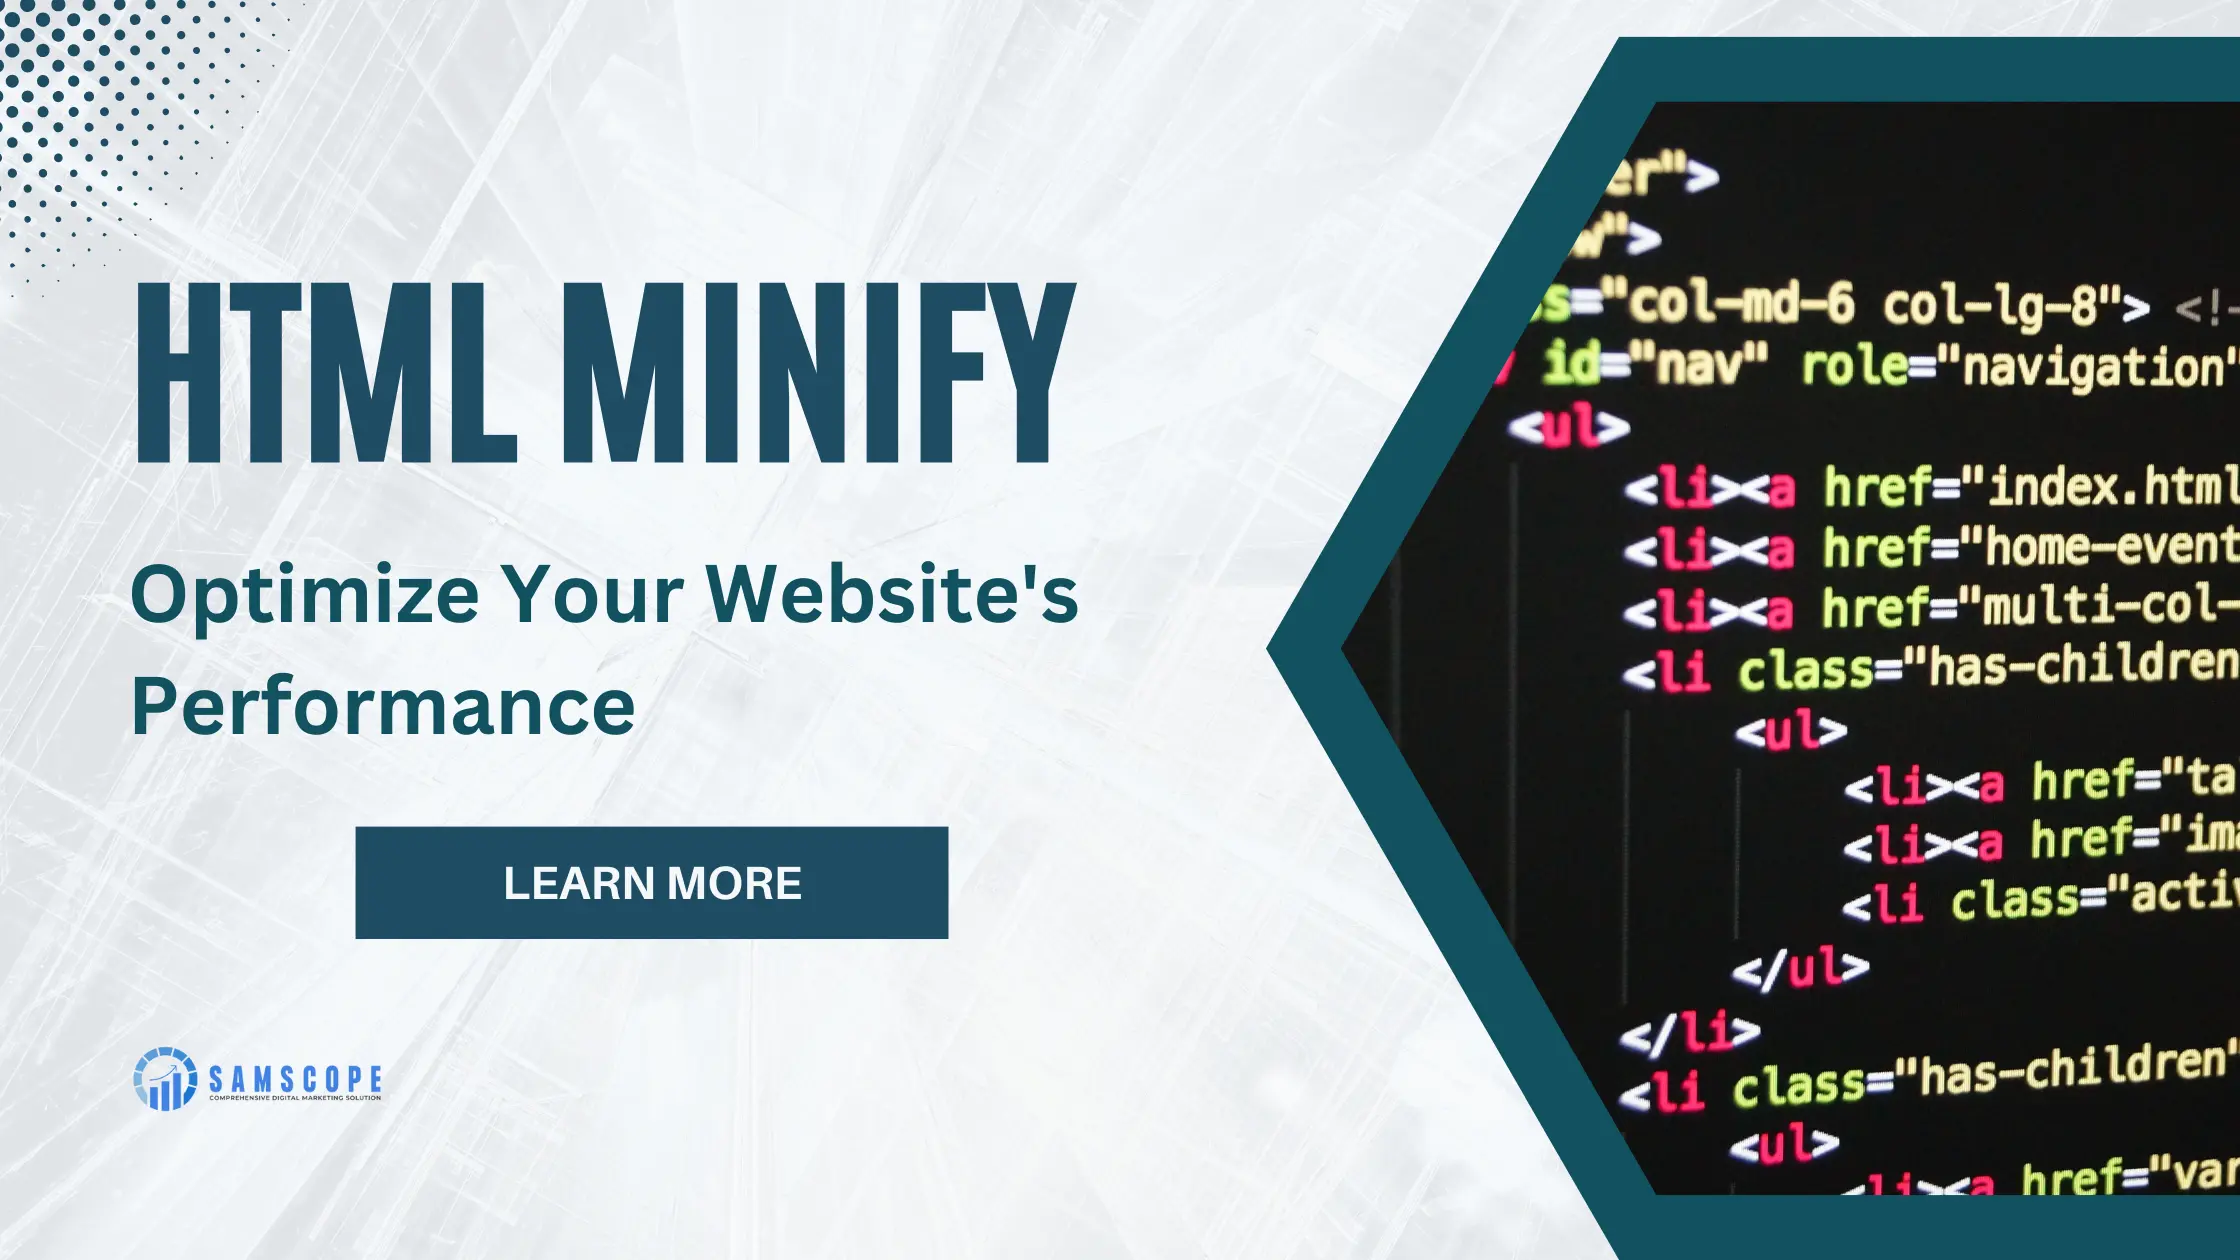 HTML Minify: Optimize Your Website's Performance